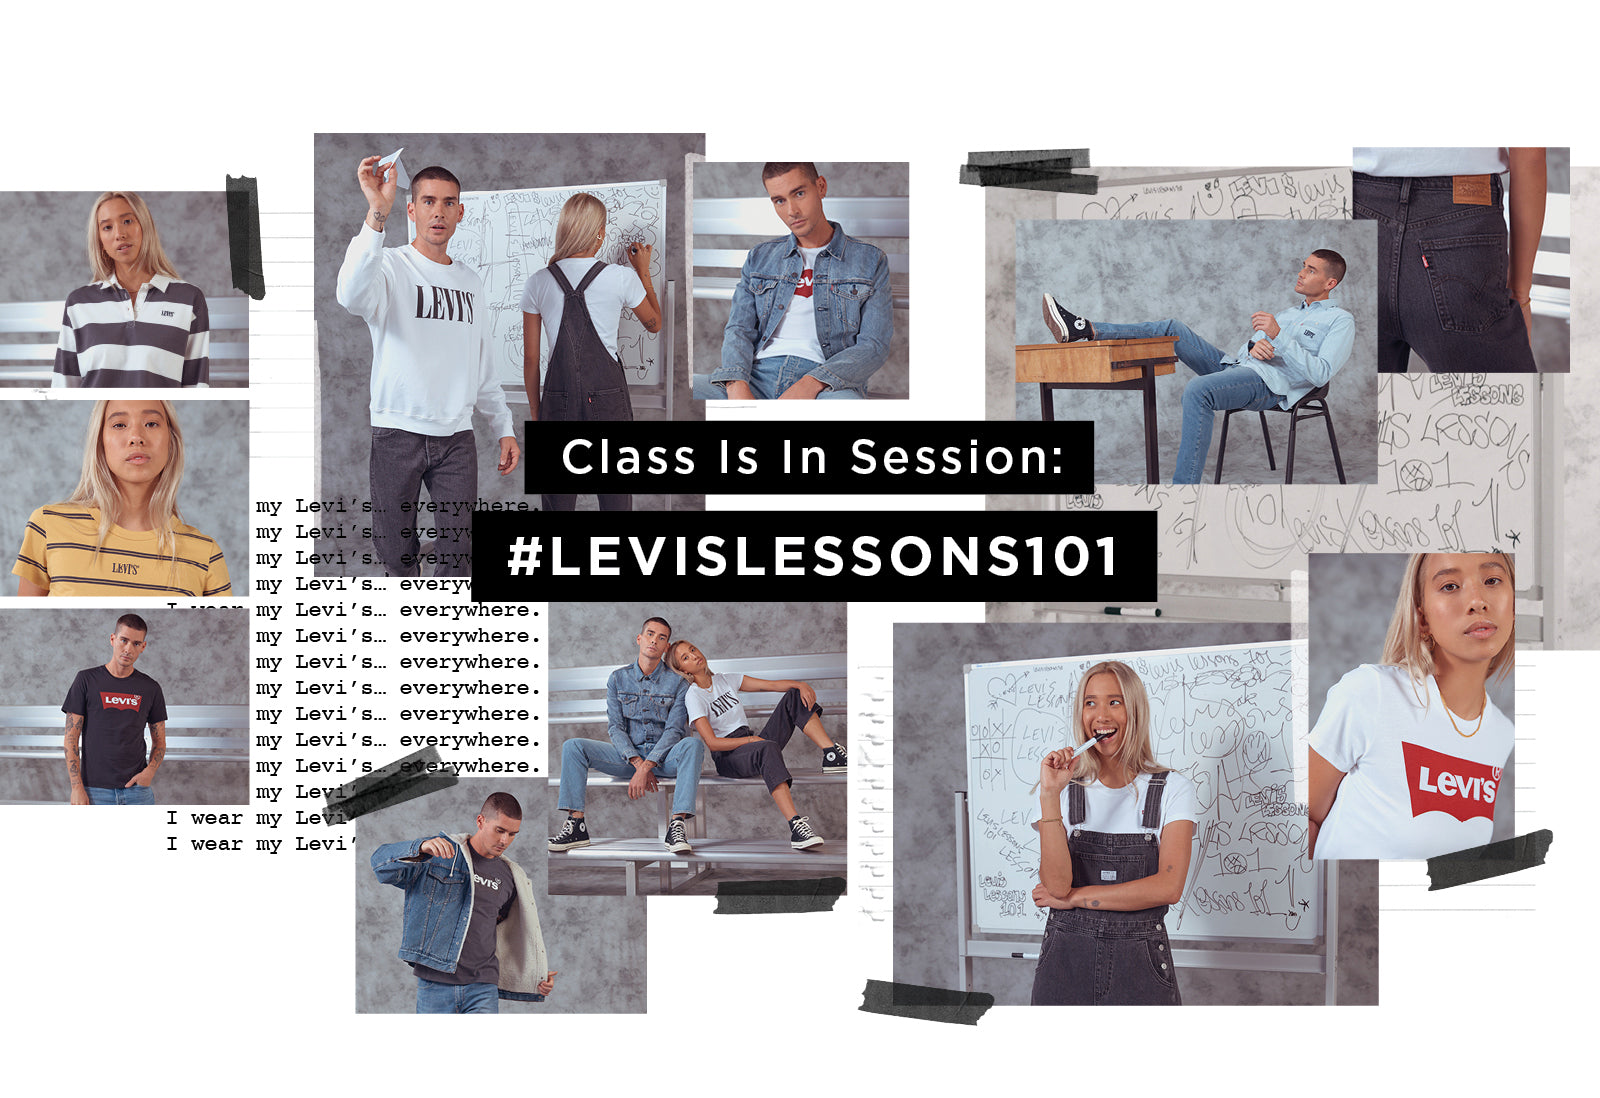 Class Is In Session: #LEVISLESSONS101